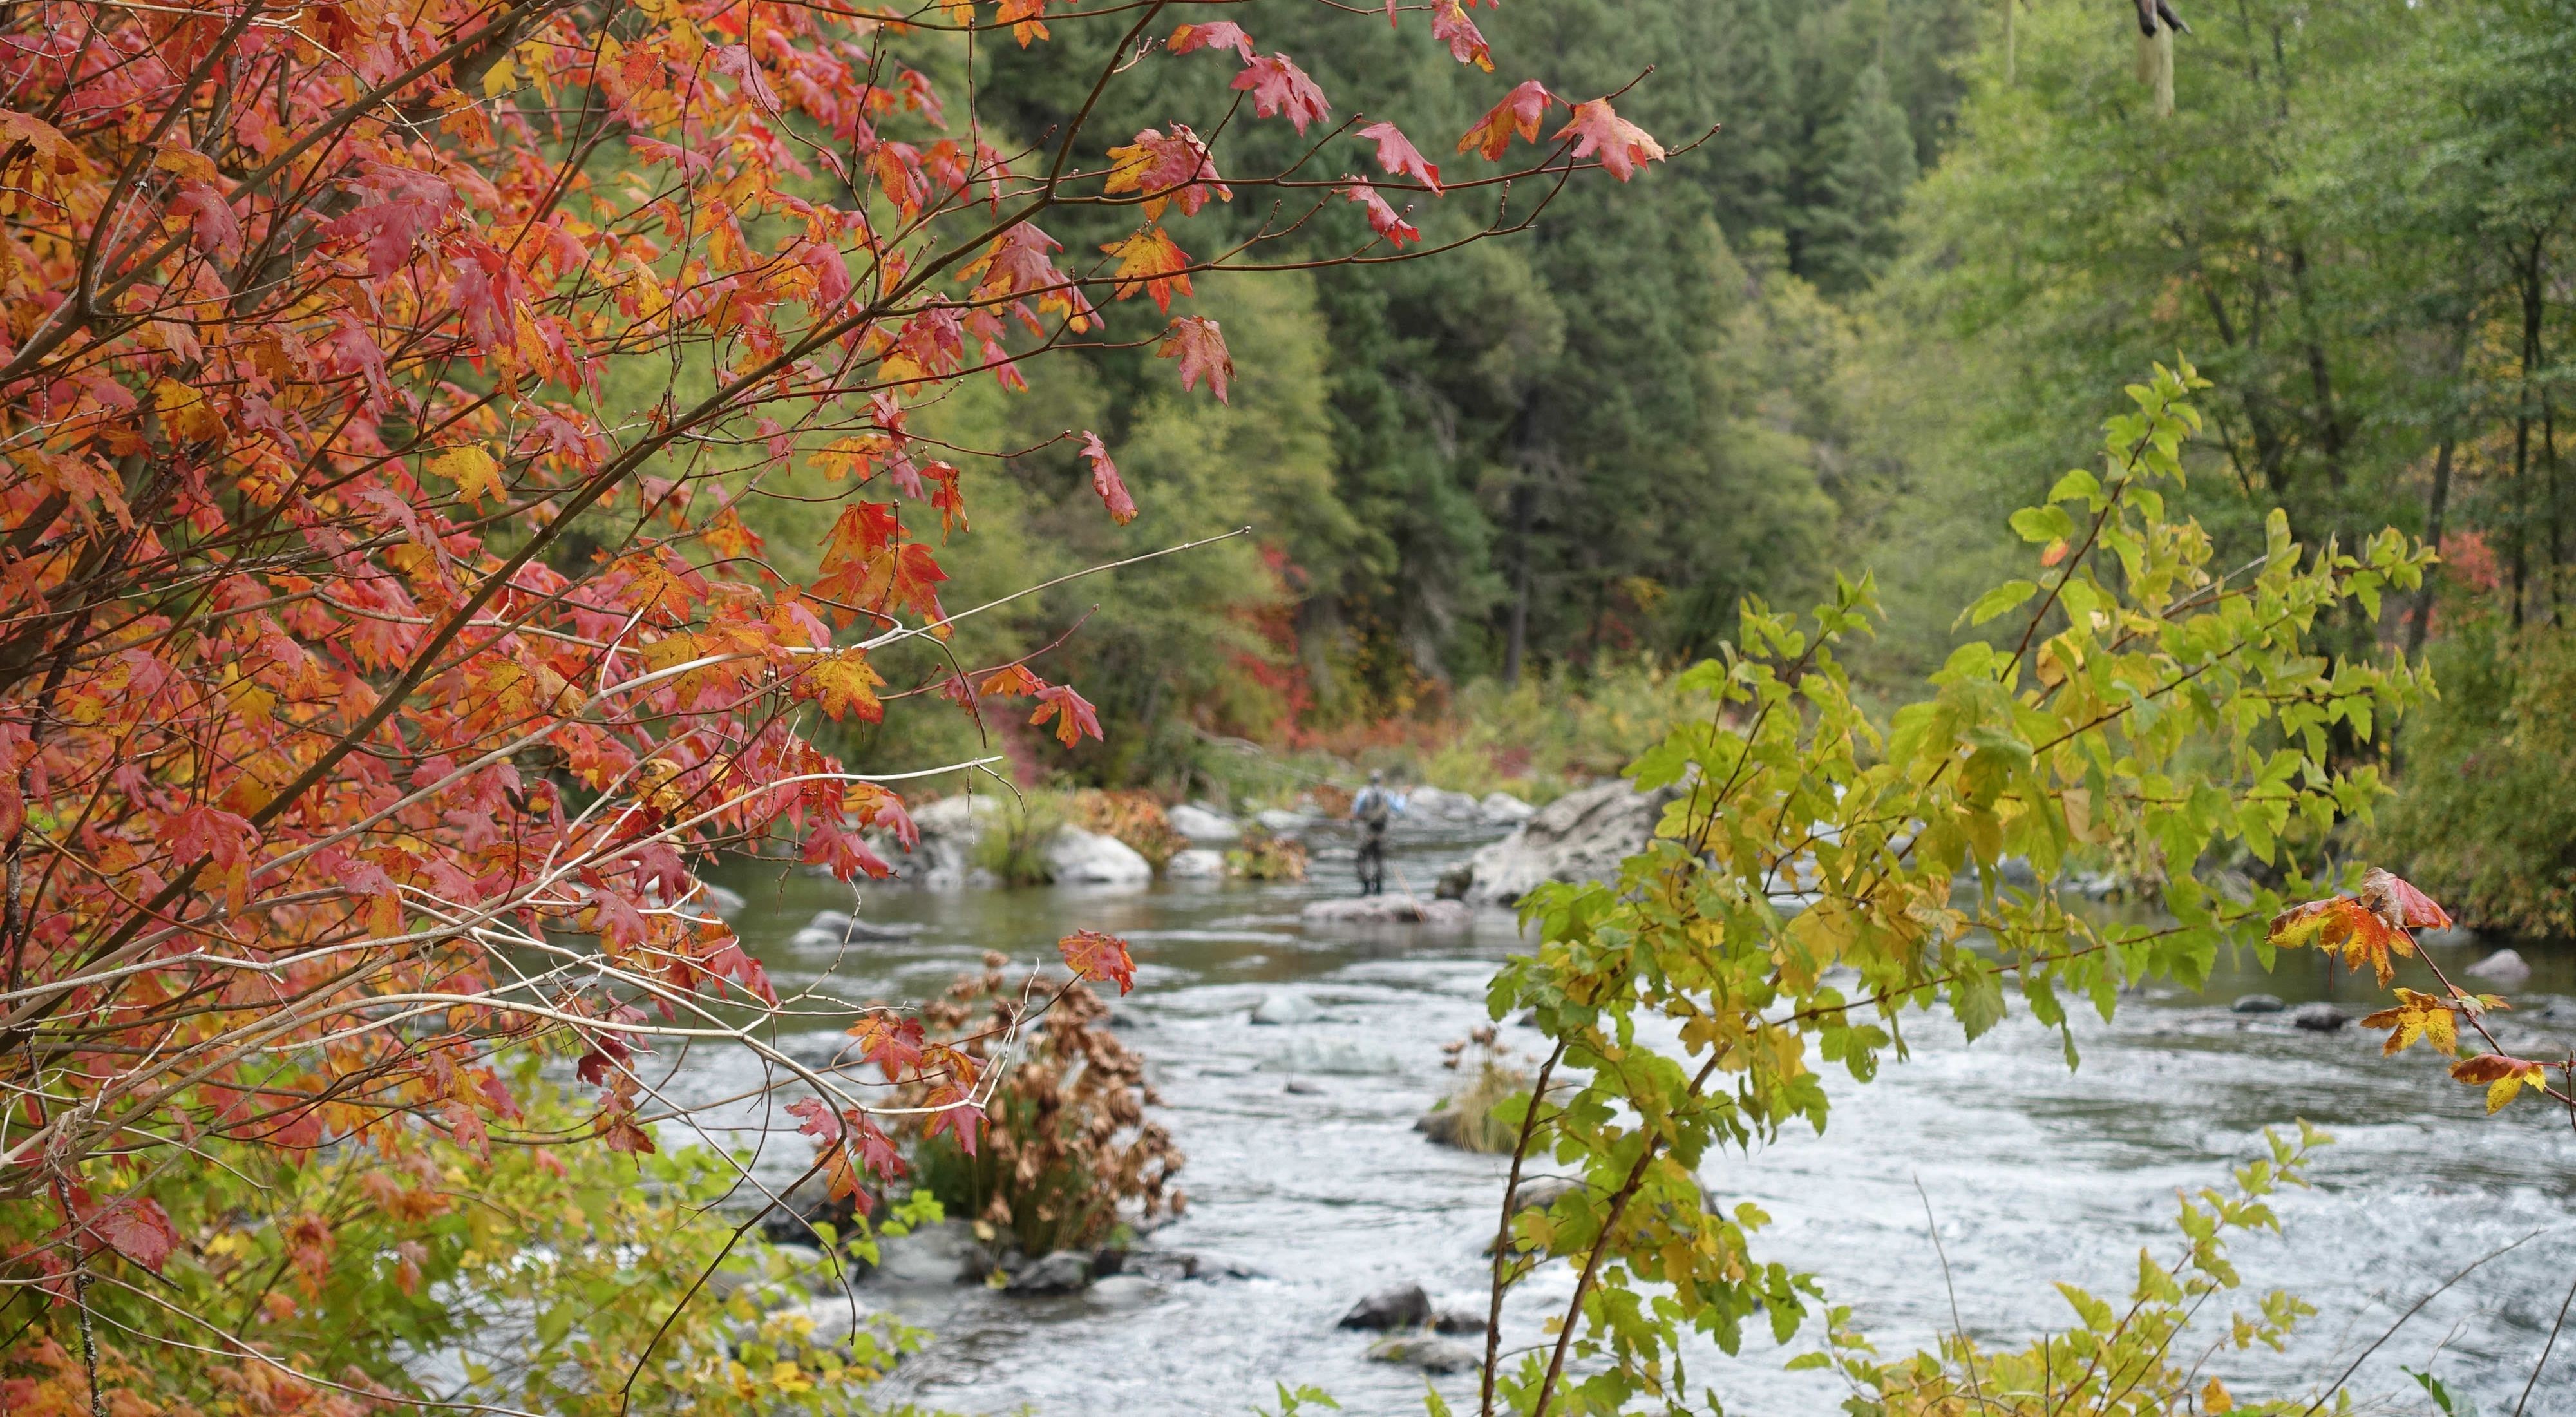 Fall foliage on trees on the banks of a river.